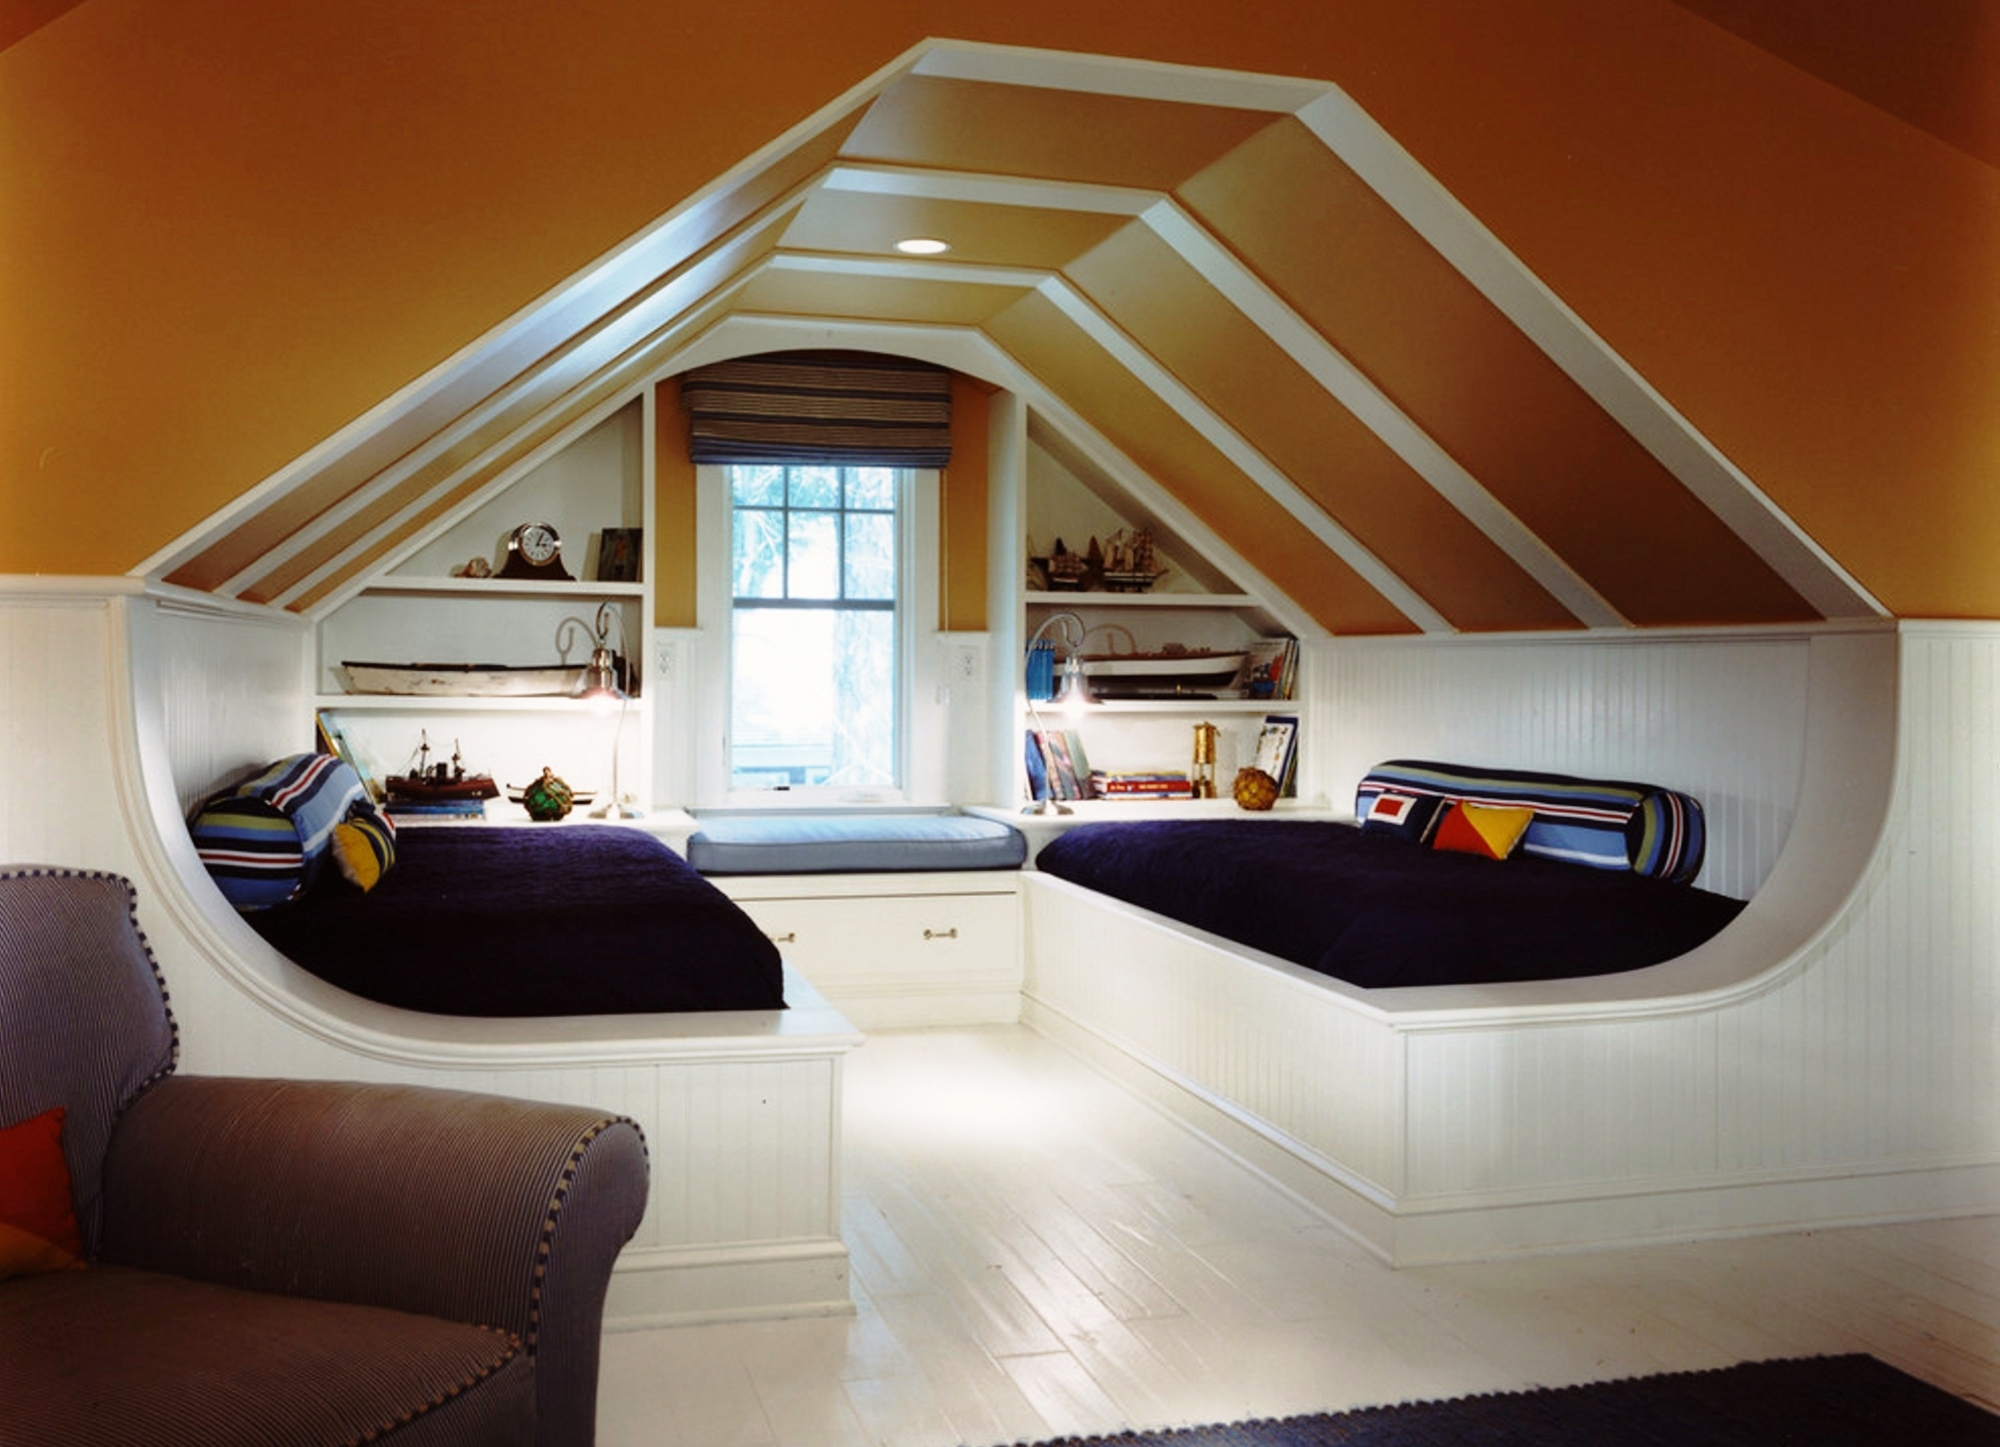 Turn your attic as an extra bedroom.